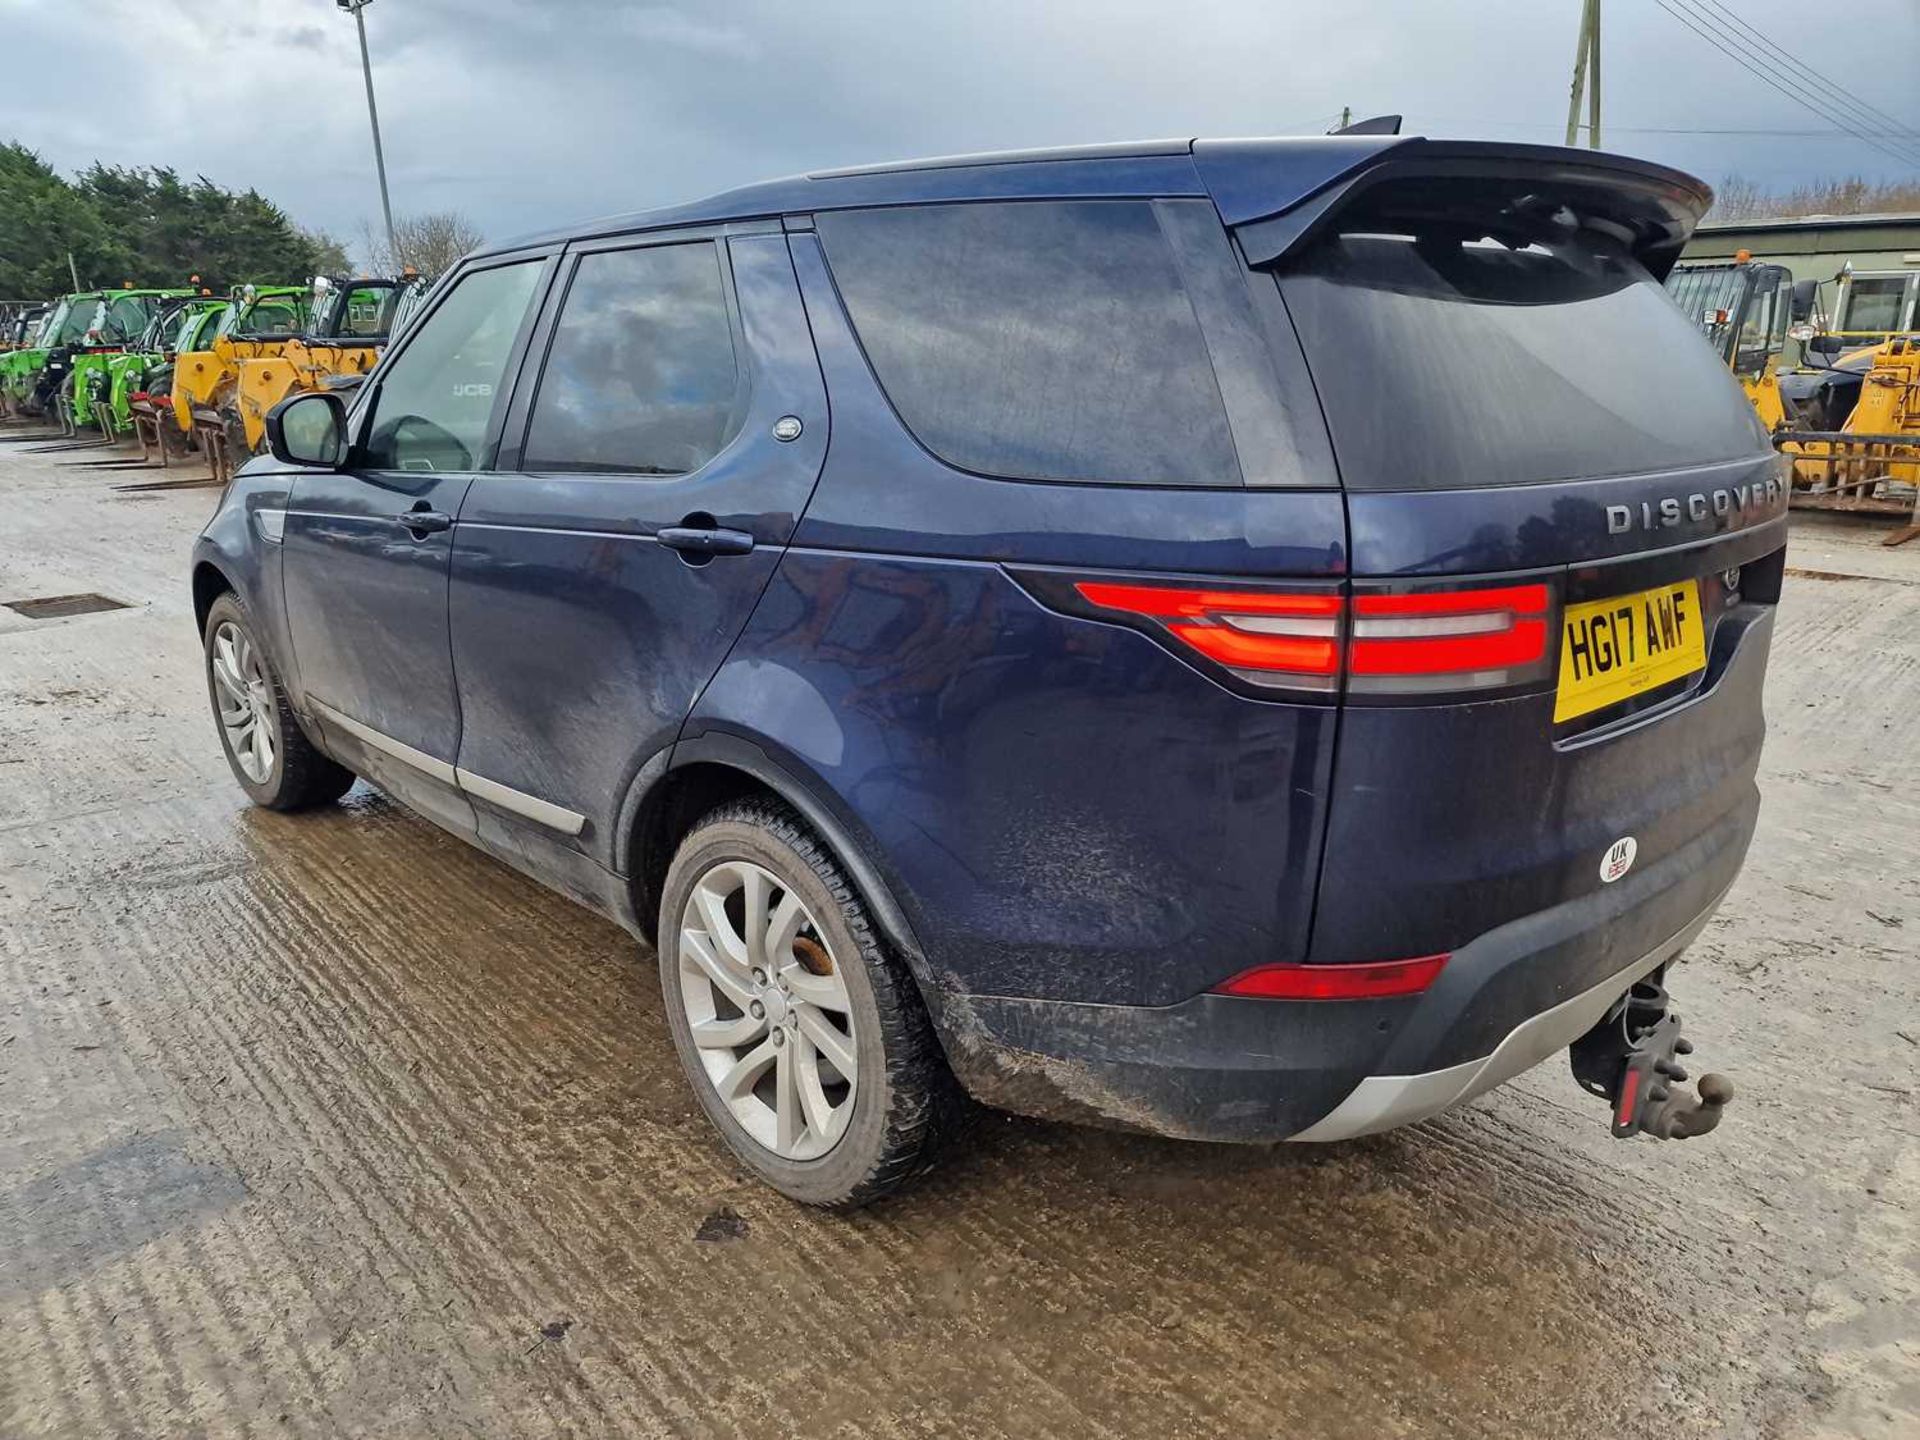 Landrover Discovery HSE Td6, Auto, Paddle Shift, Reverse Camera, Sat Nav, Parking Sensors, Full Leat - Image 53 of 75